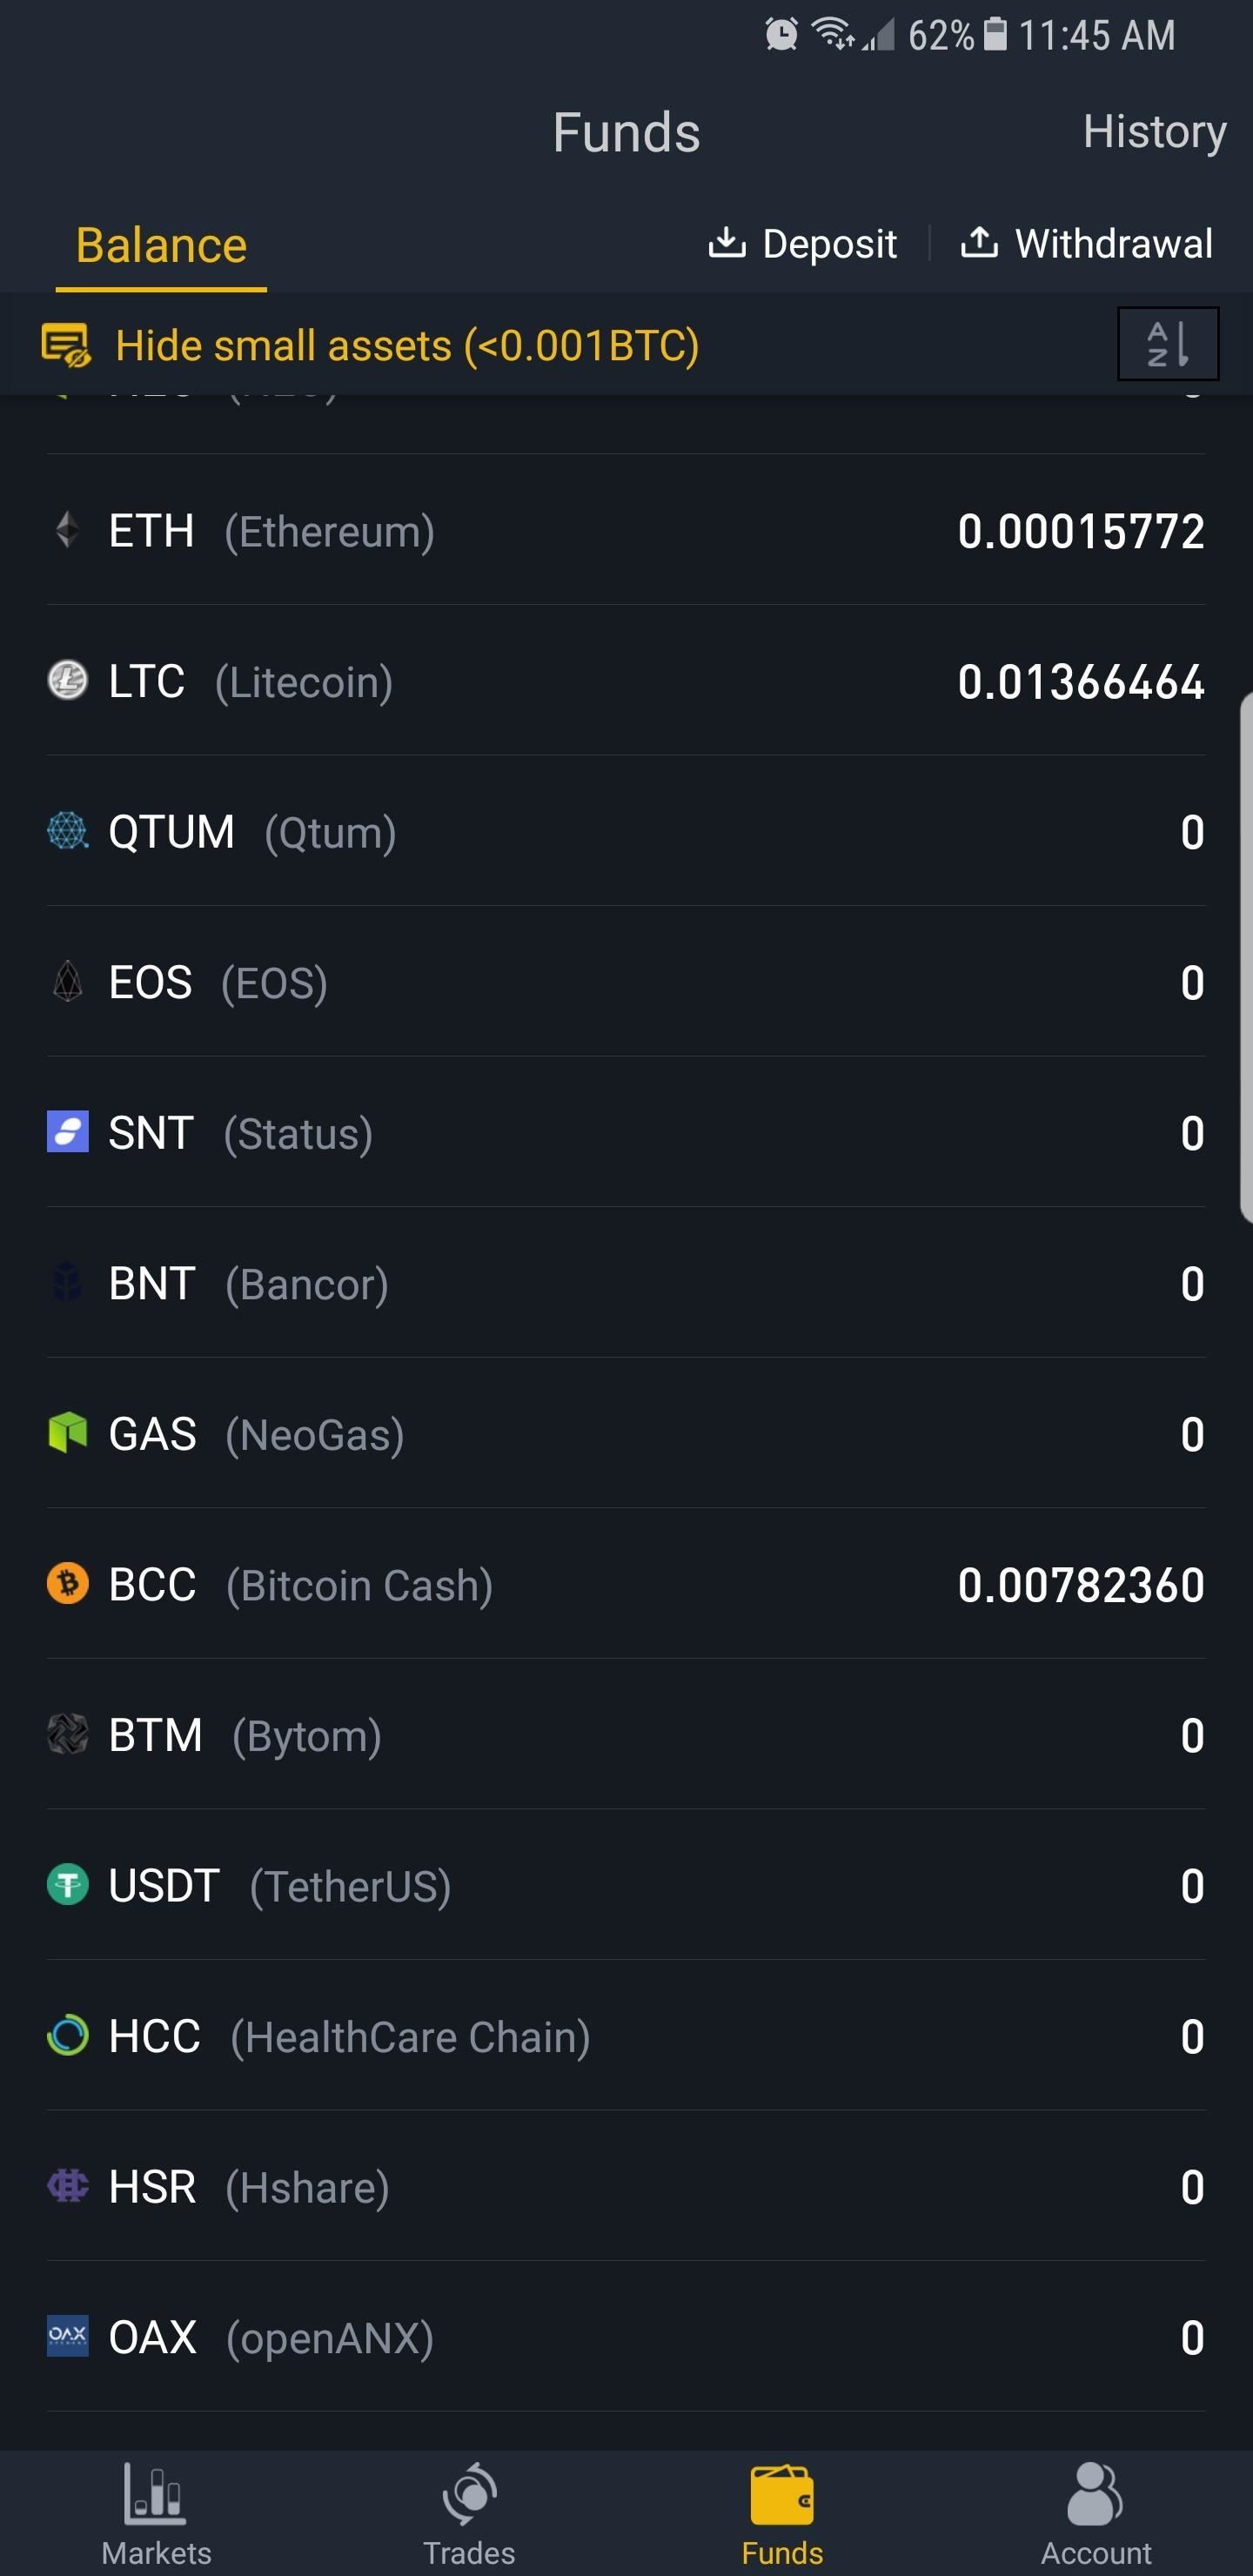 How to Transfer Bitcoin, Ether & More from Coinbase to Binance